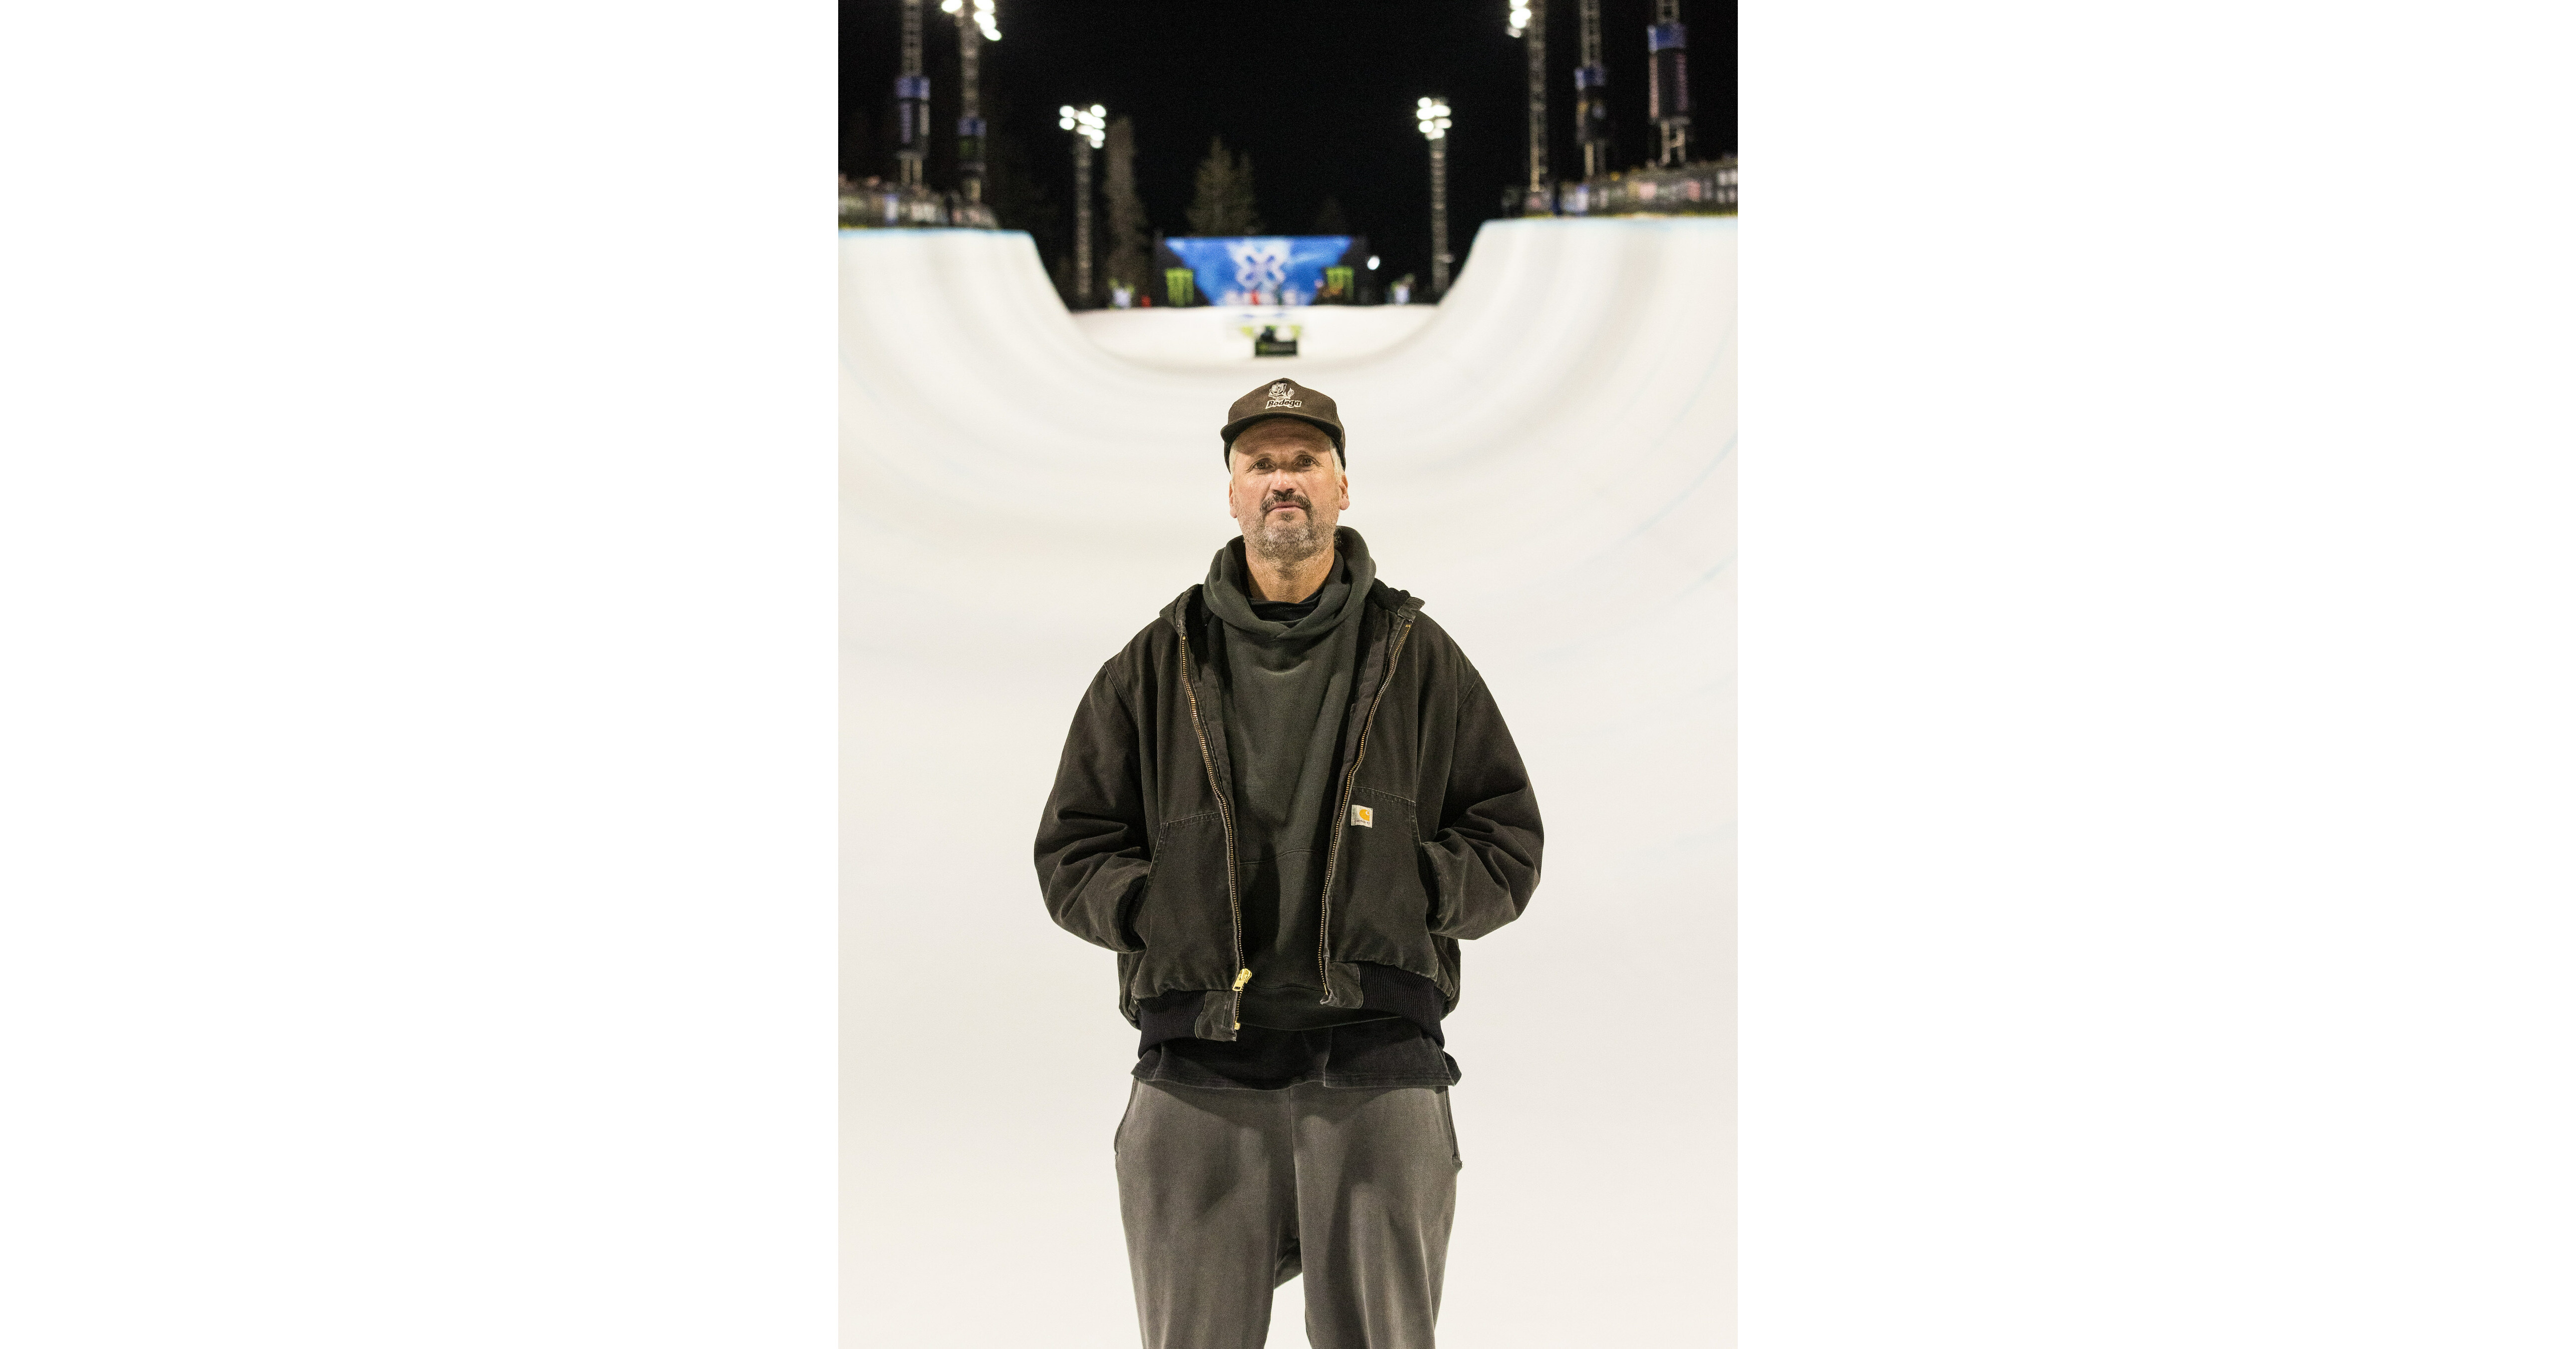 Entrepreneur and Action Sports Veteran Shaun Neff Joins X Games Ownership Group as an Investor and Advisor